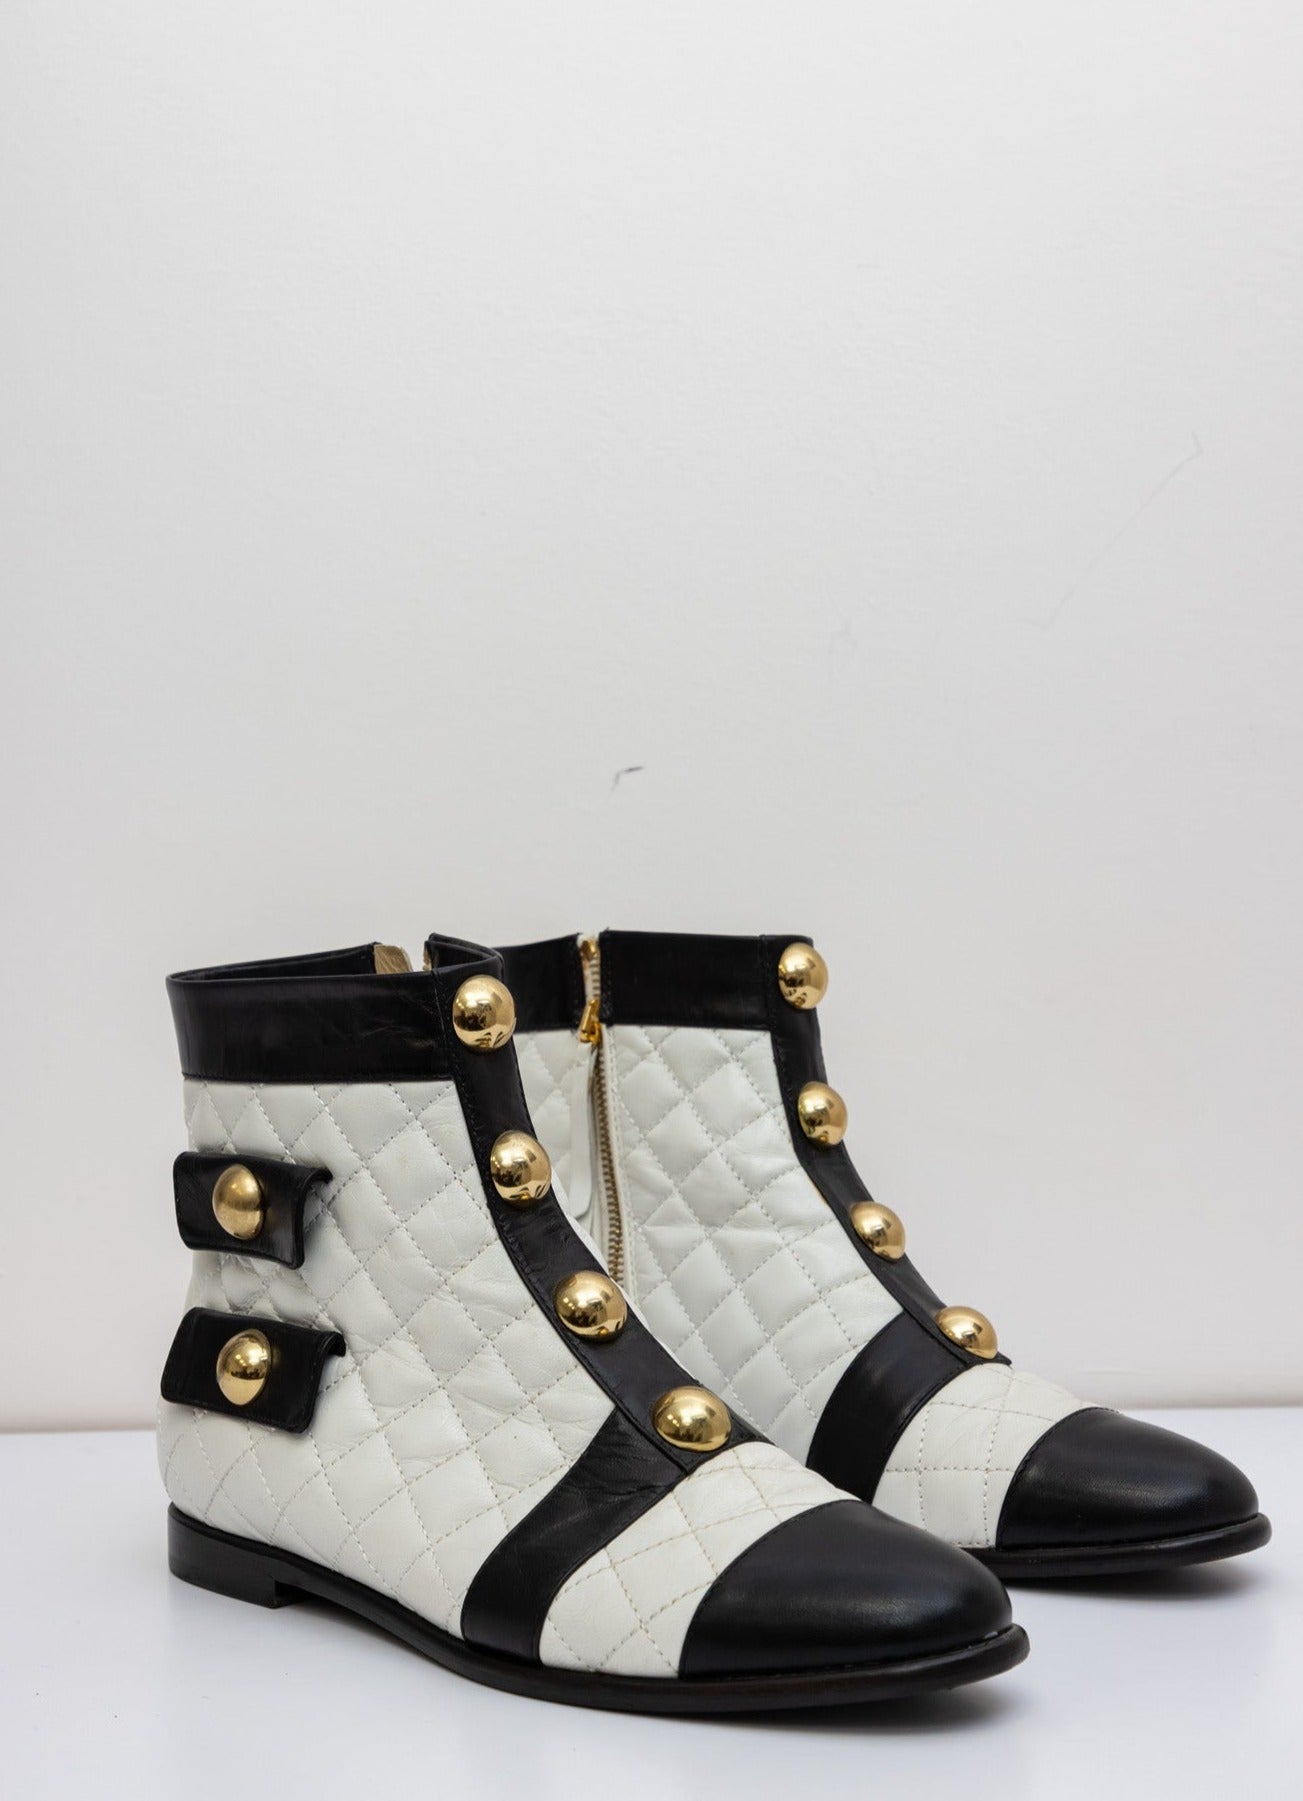 Moschino white and black Matelassé leather boot with buckles